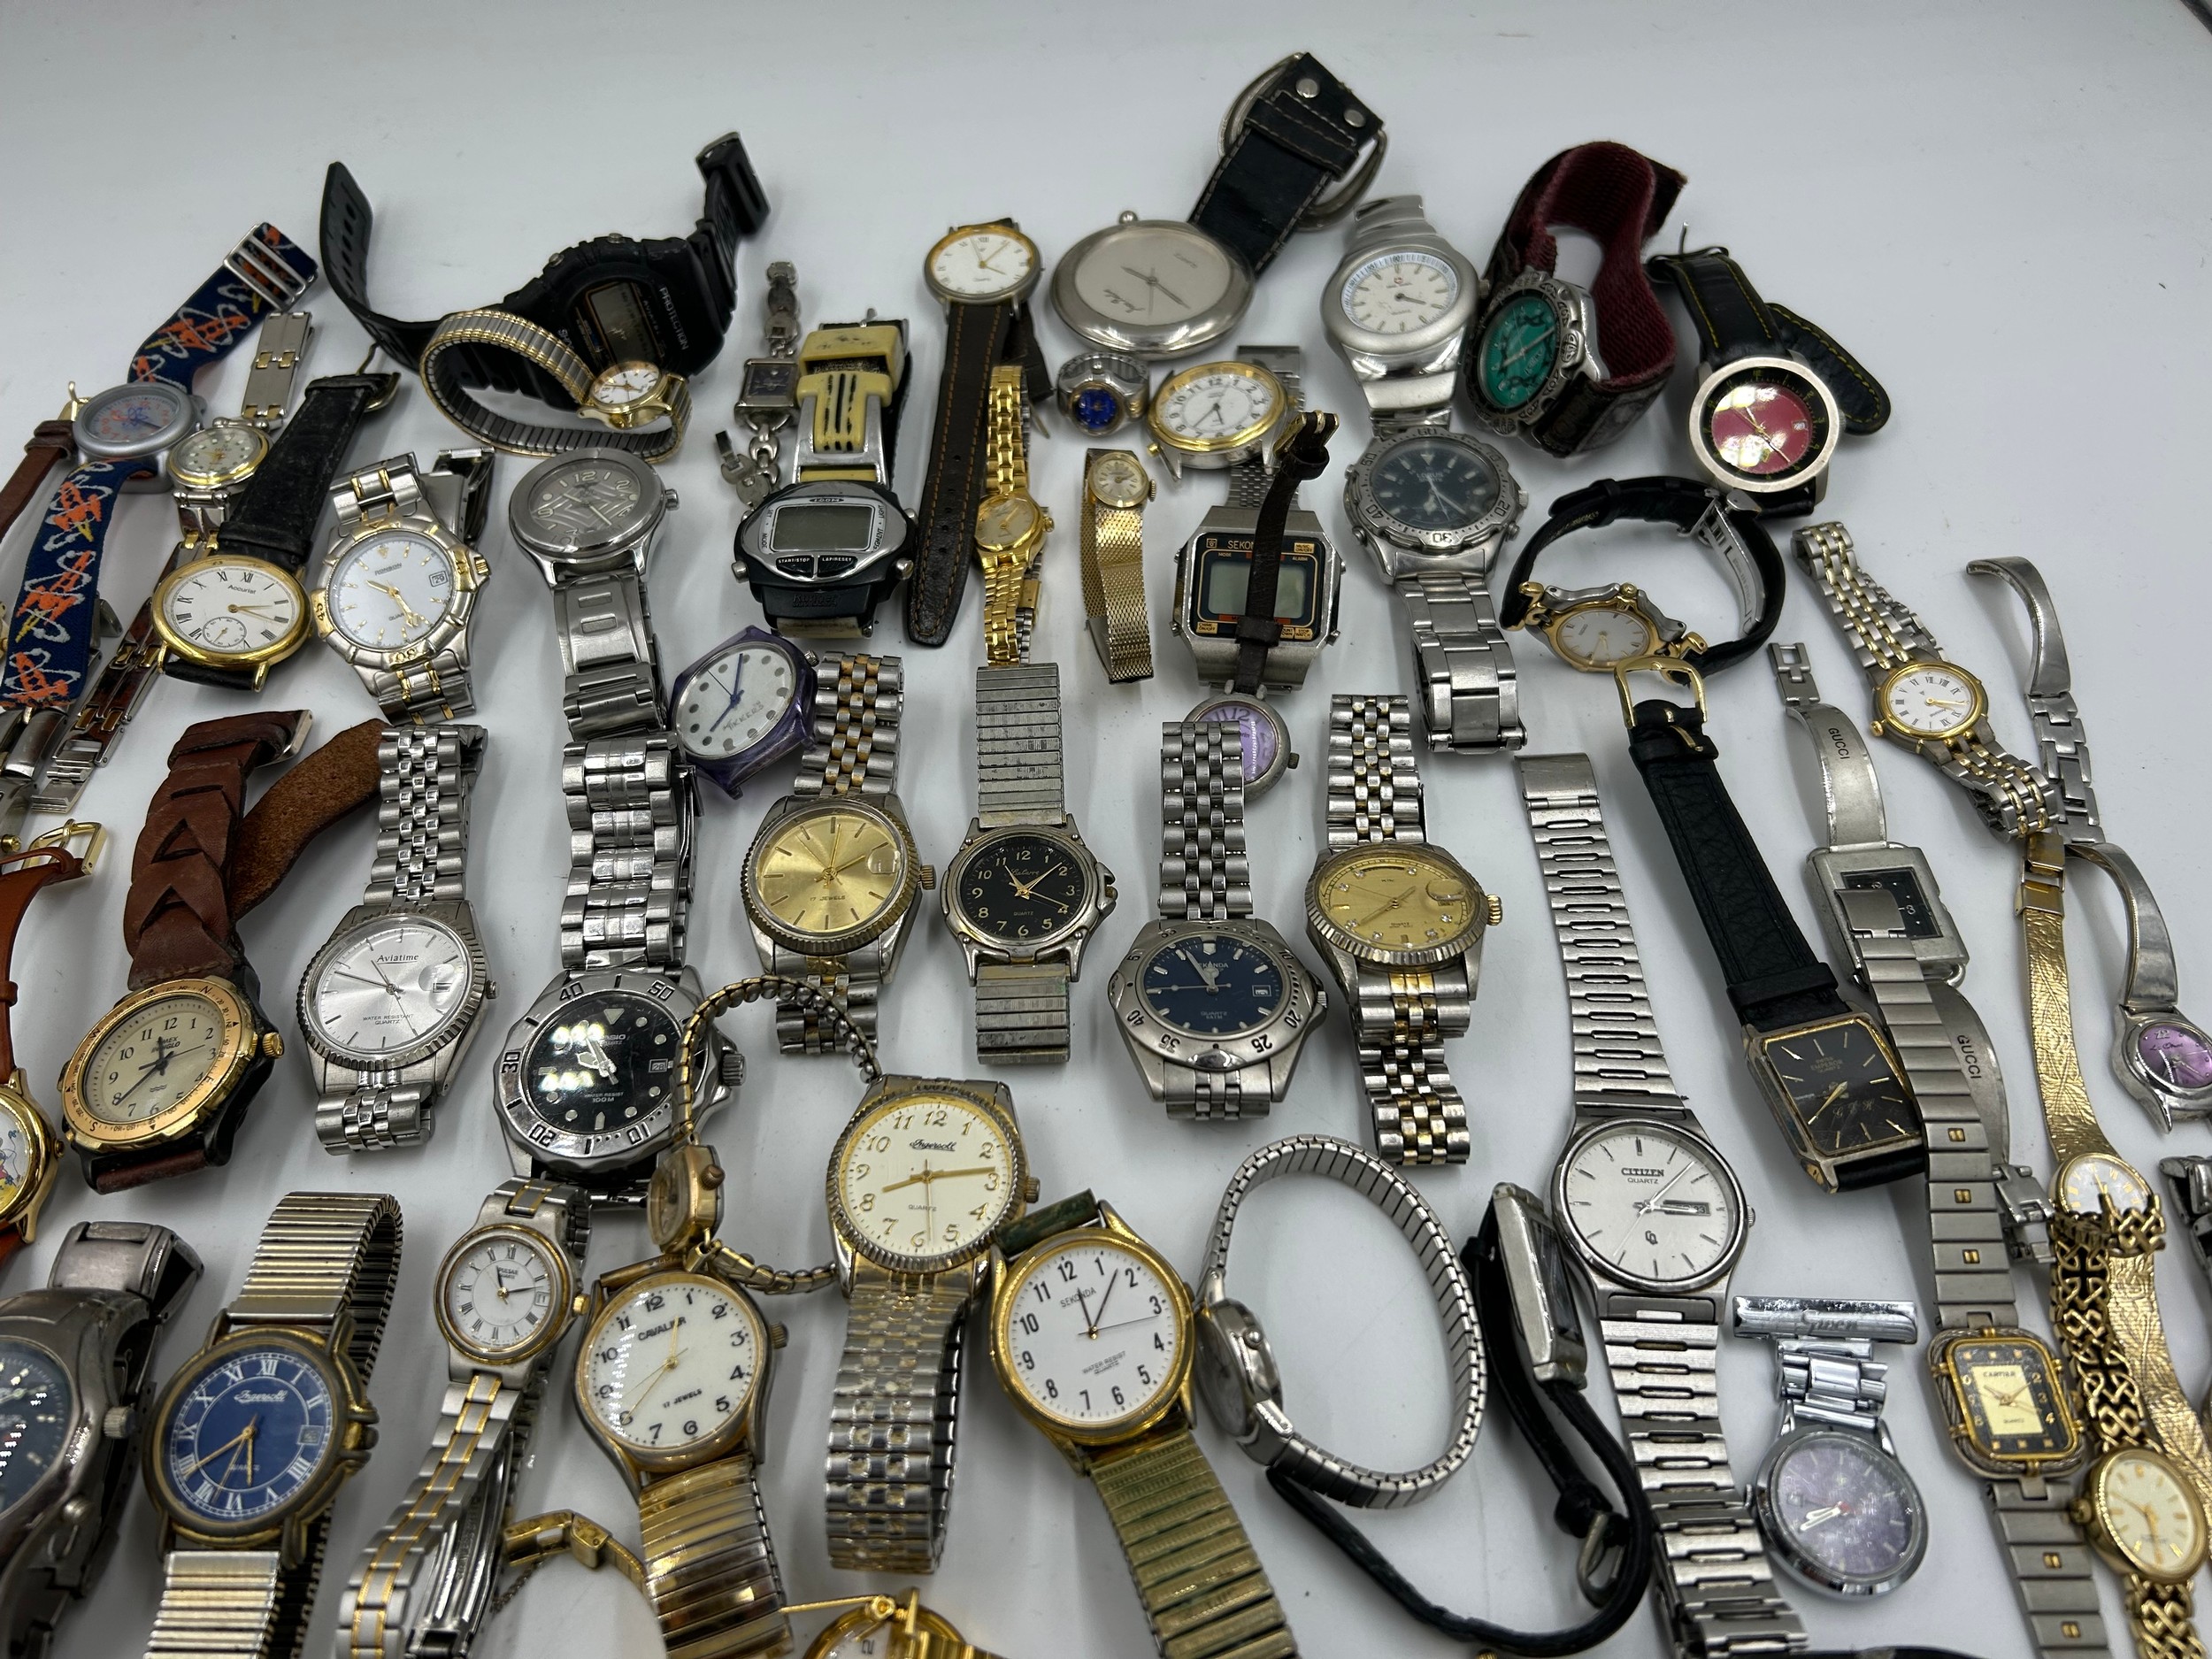 A quantity of watches to include Sekonda, Ingersoll, Lorus, Seiko, Rotary, Timex etc. - Image 3 of 3